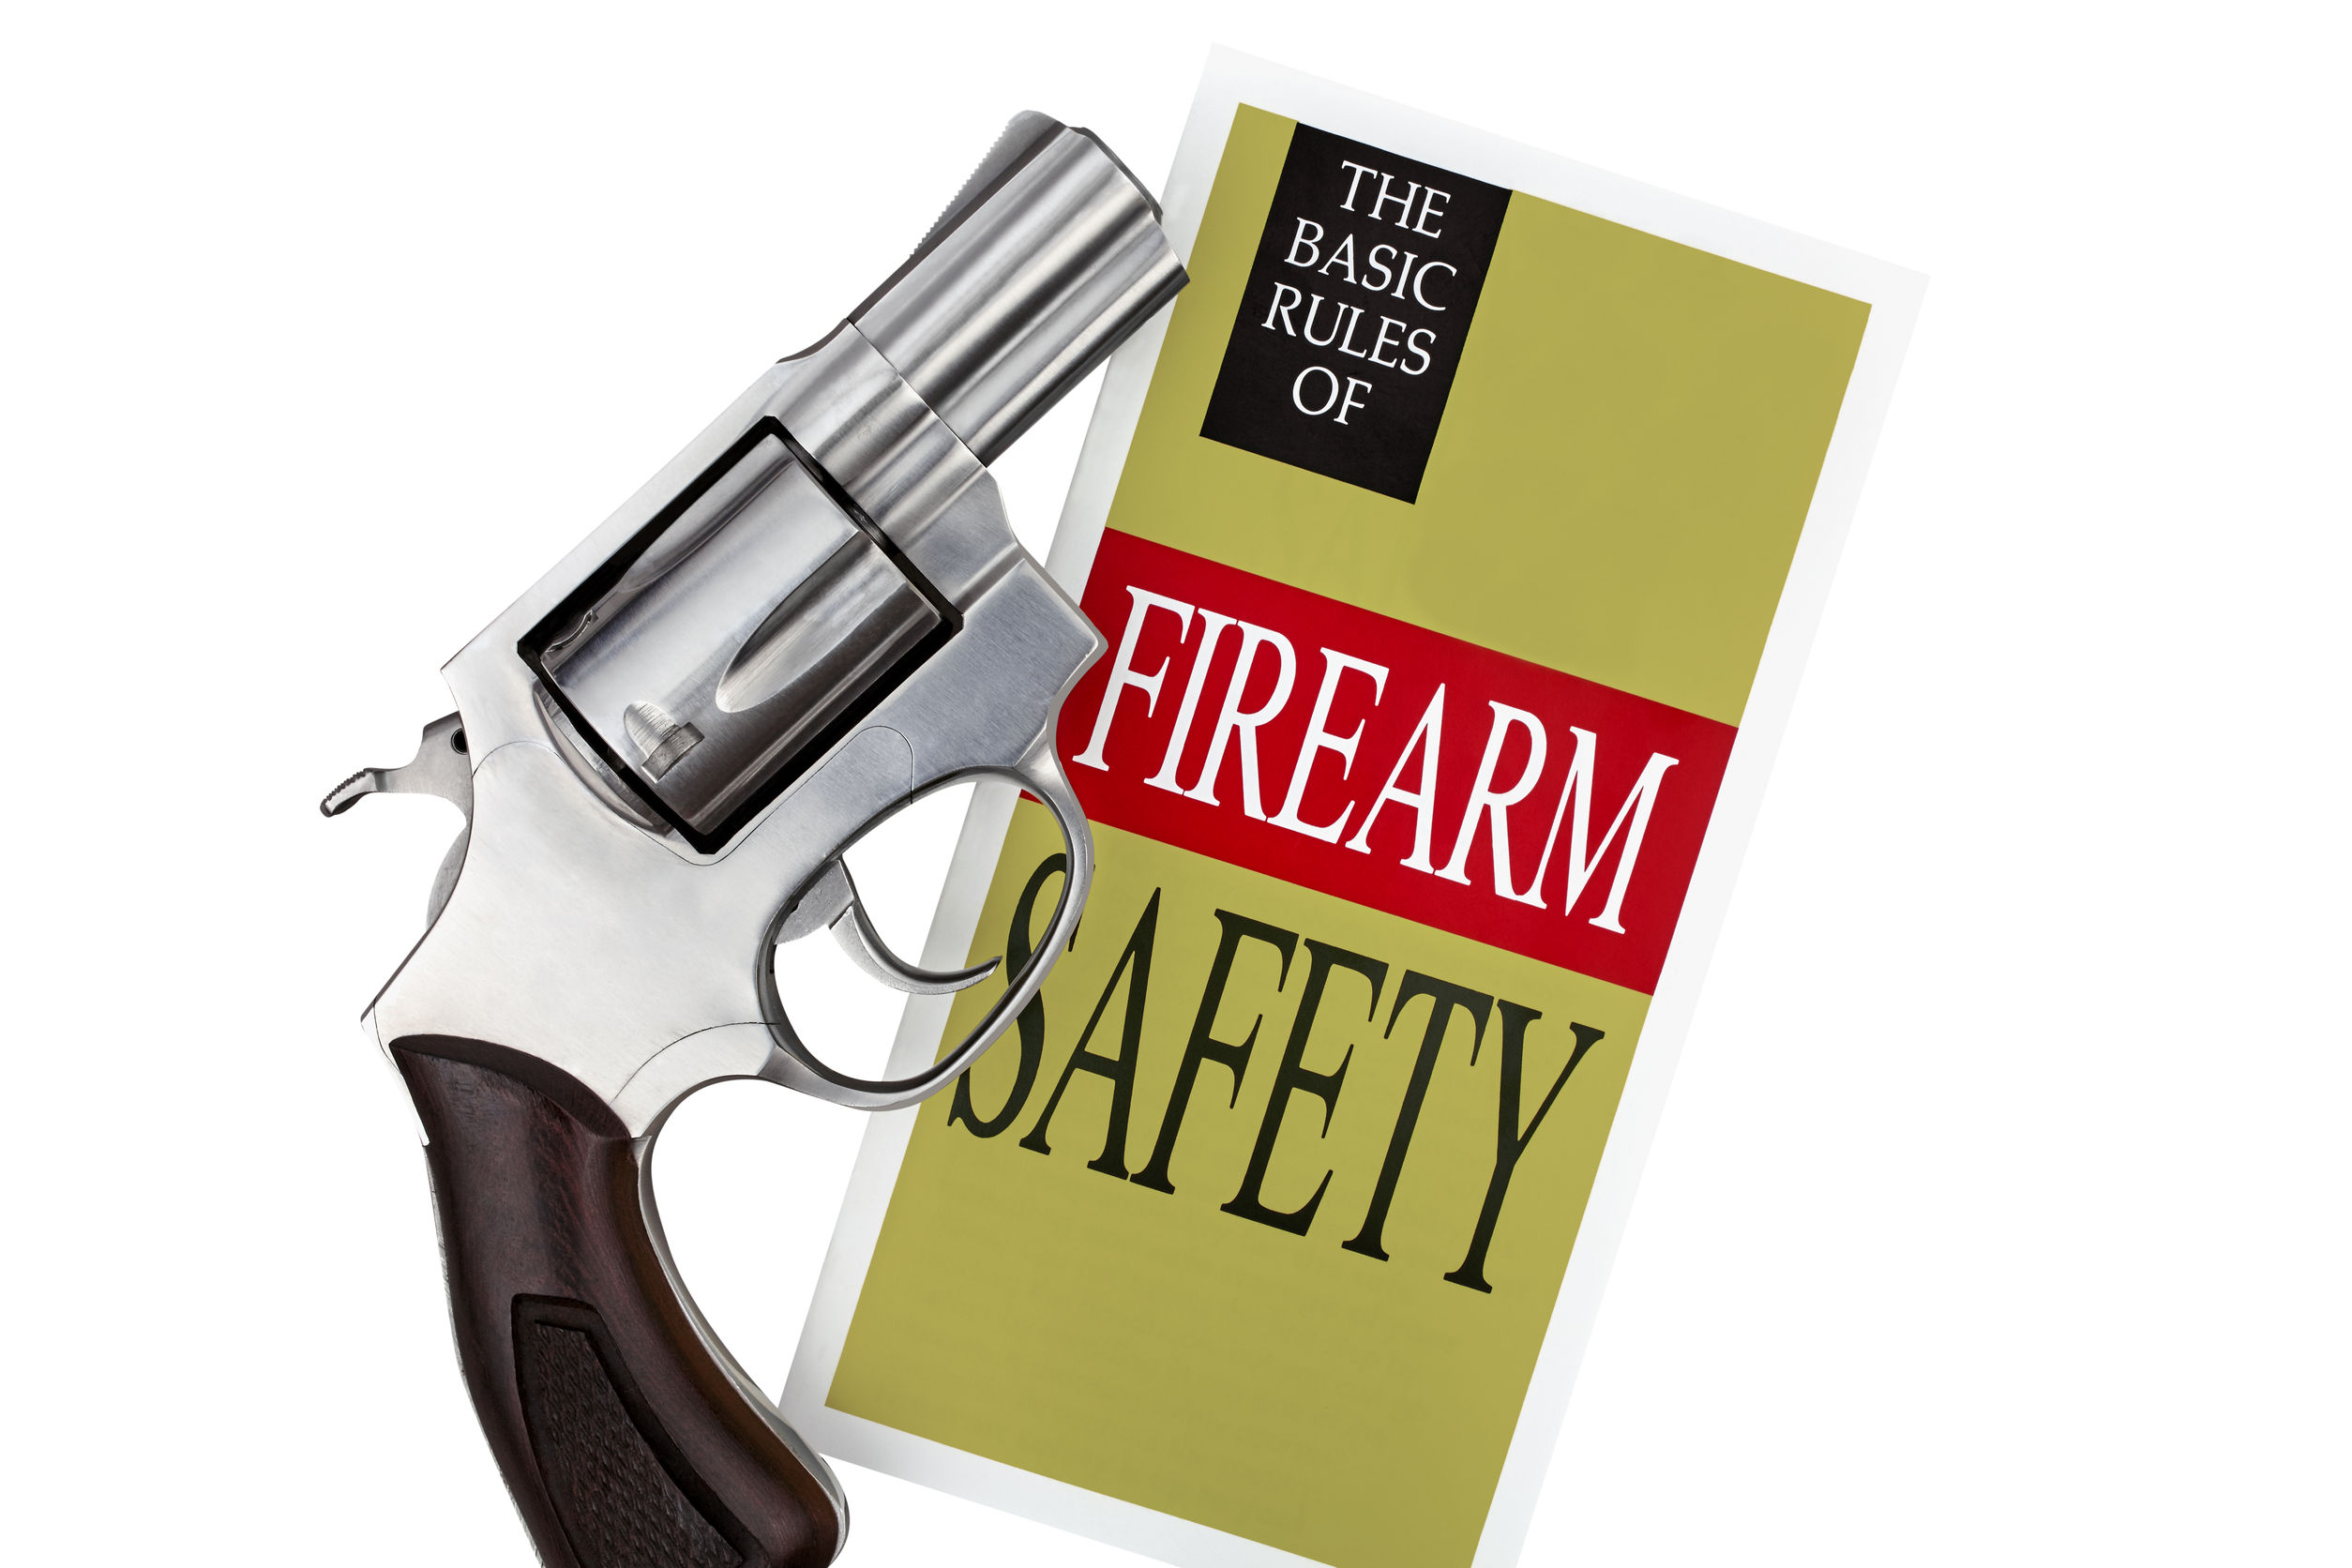 Prepare for the Firearm Safety Exam